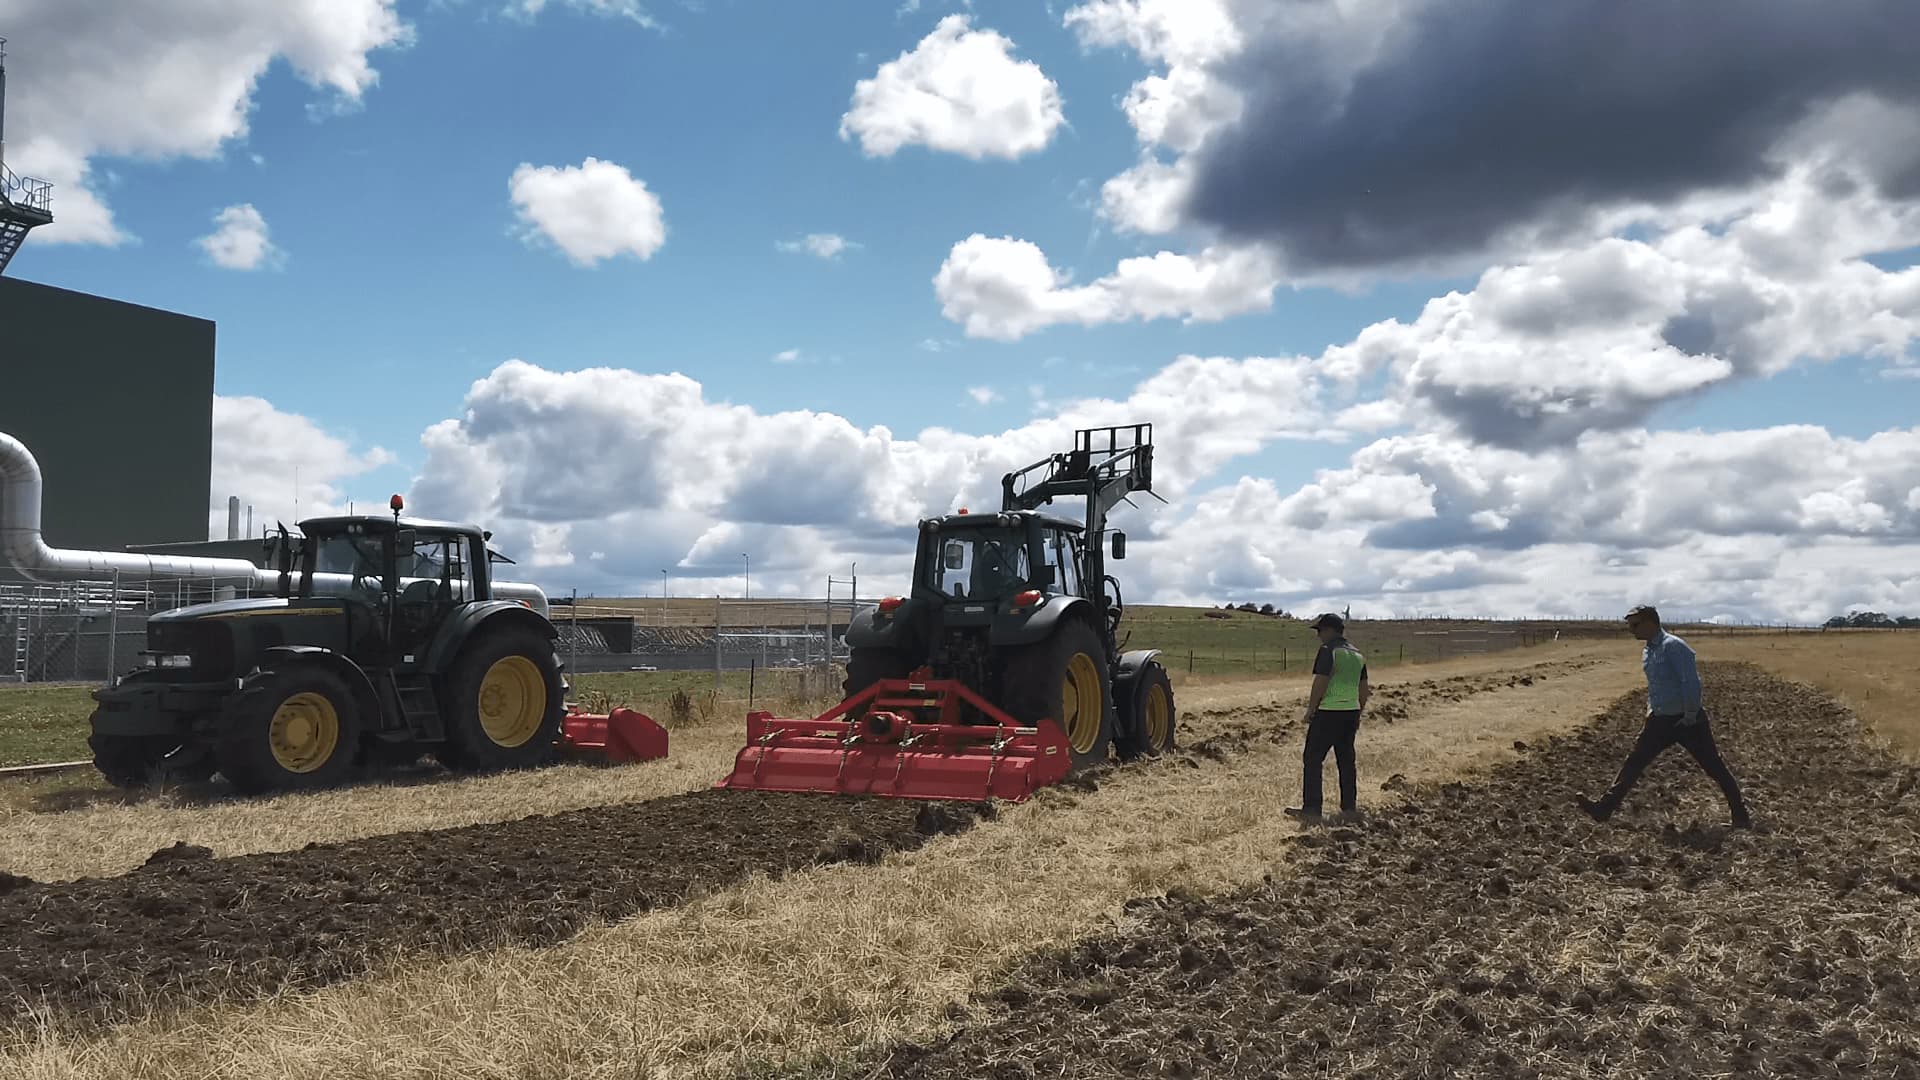 Delmade SC Series Rotary Hoe Behind a John Deere Tractor Working Image - Delmade Demo Day March 2020